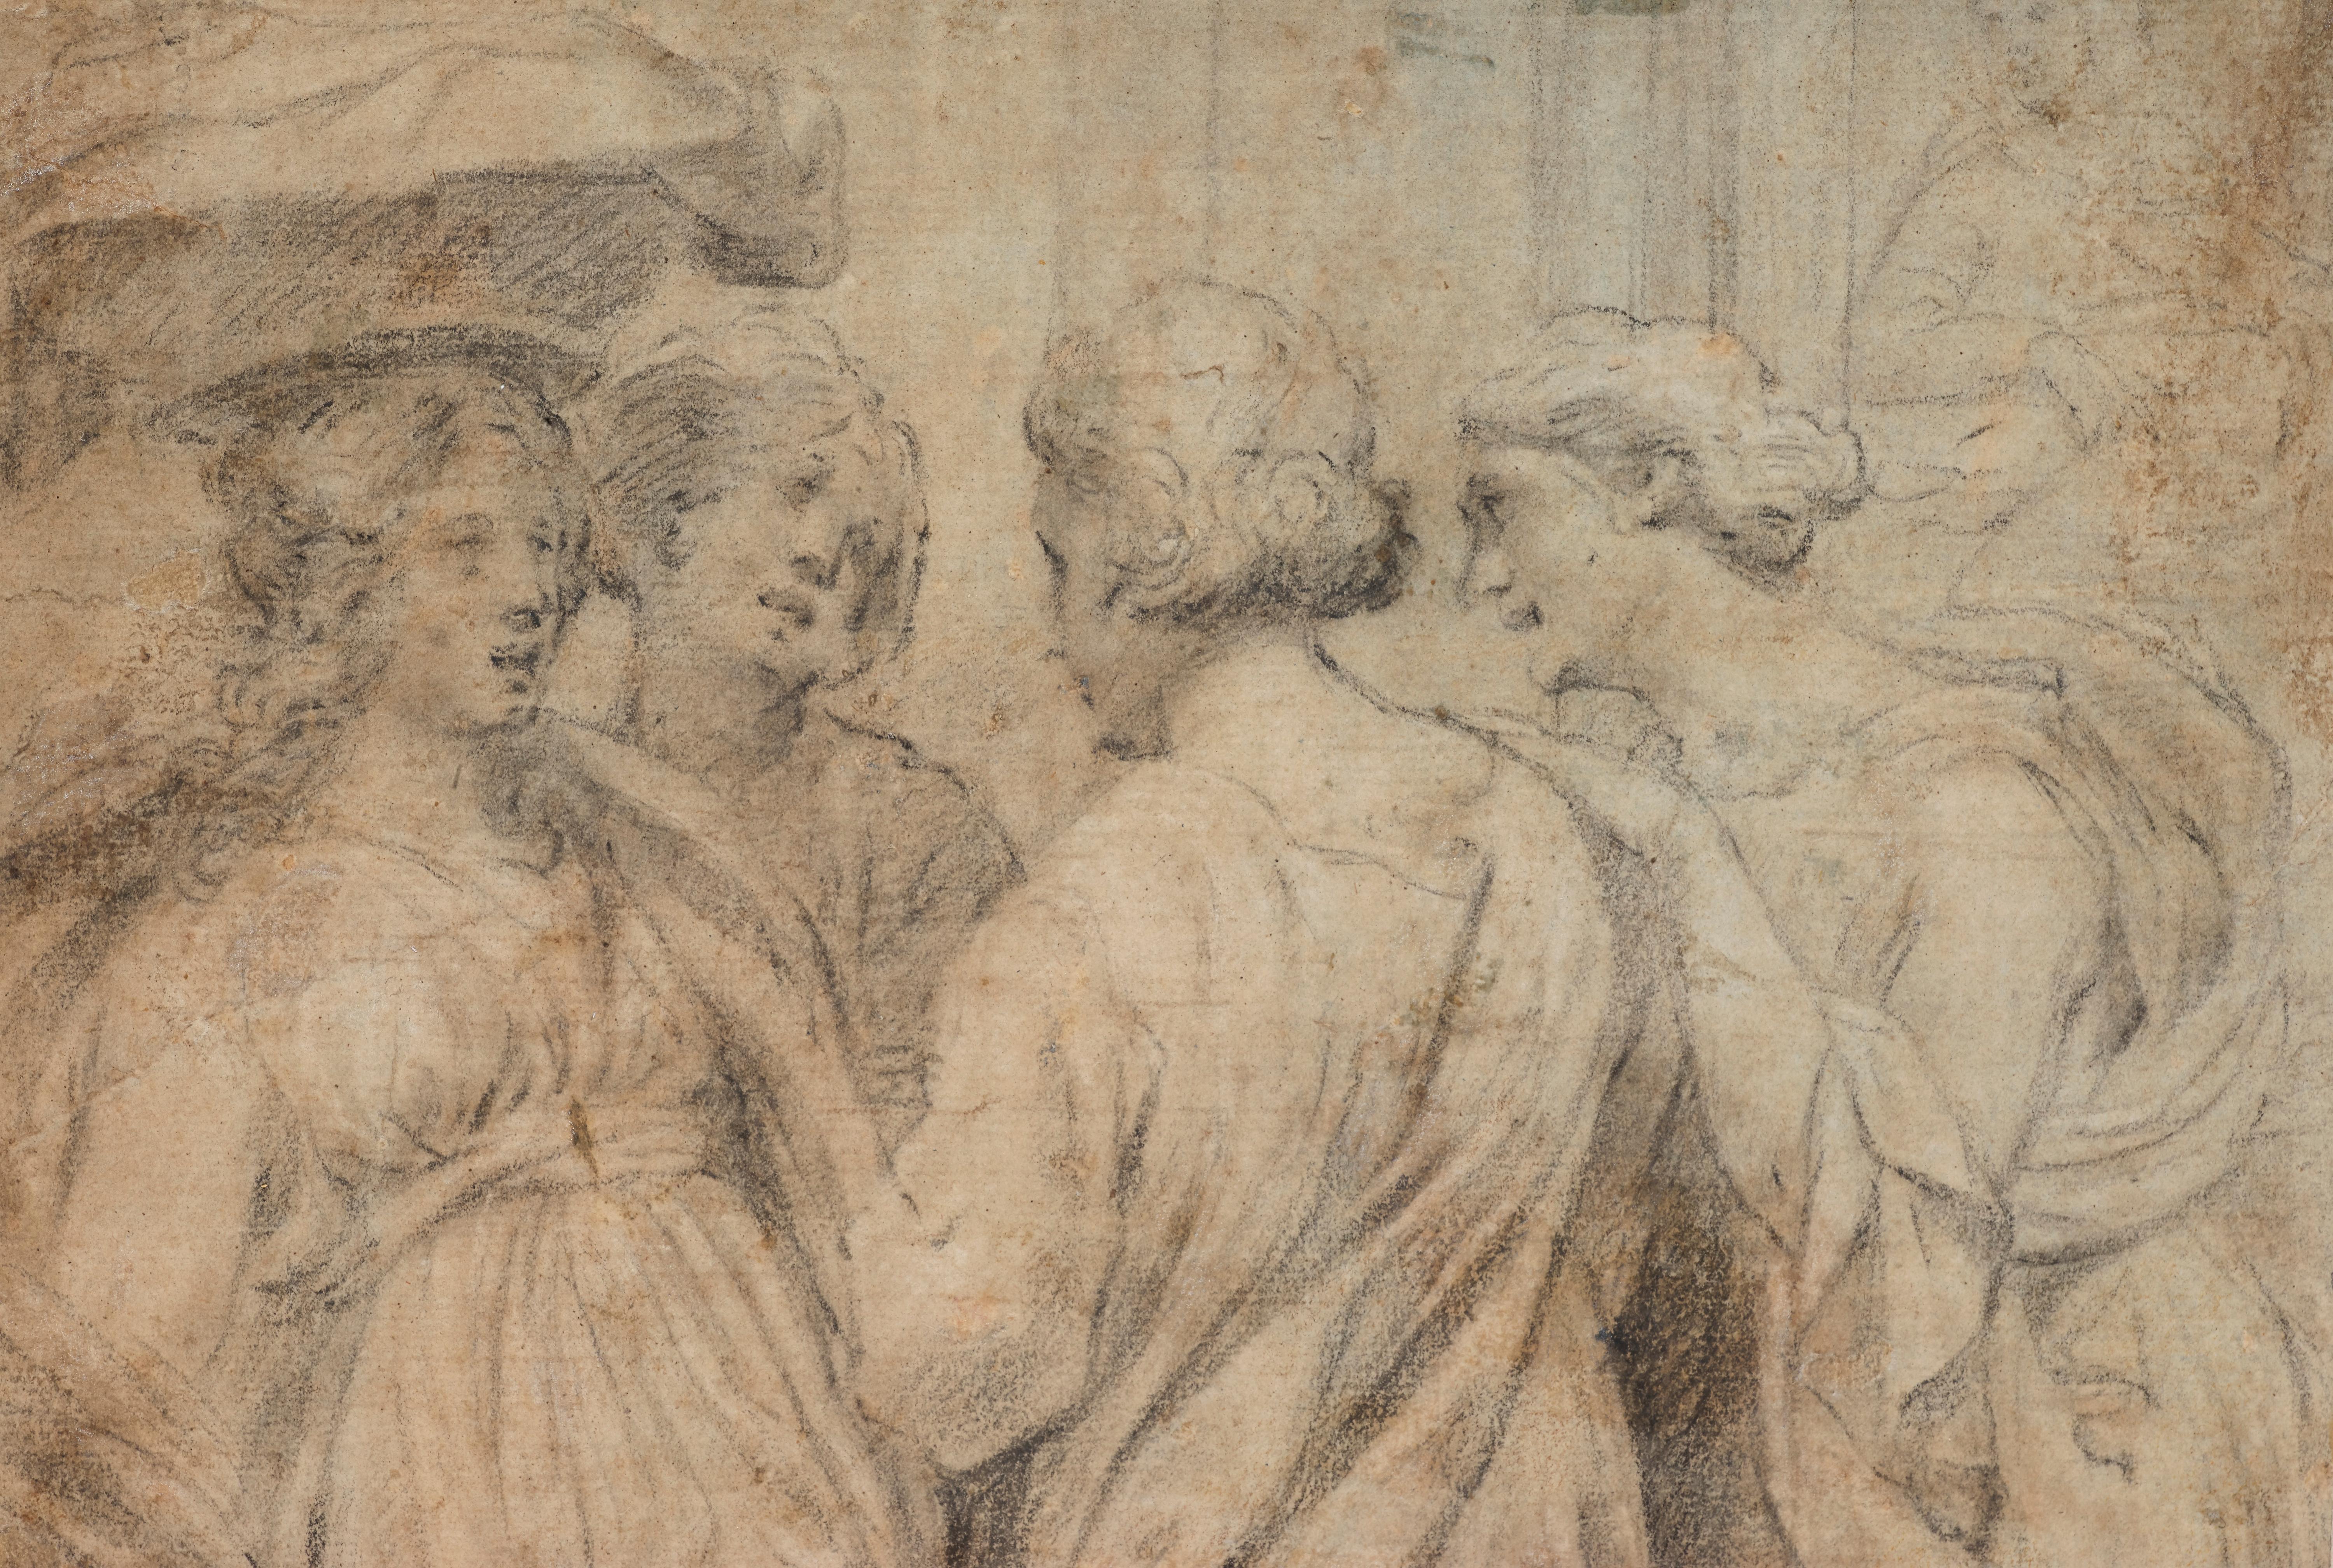 Four Women, a drawing by Francesco Furini after Ghiberti's Paradise Gate  2